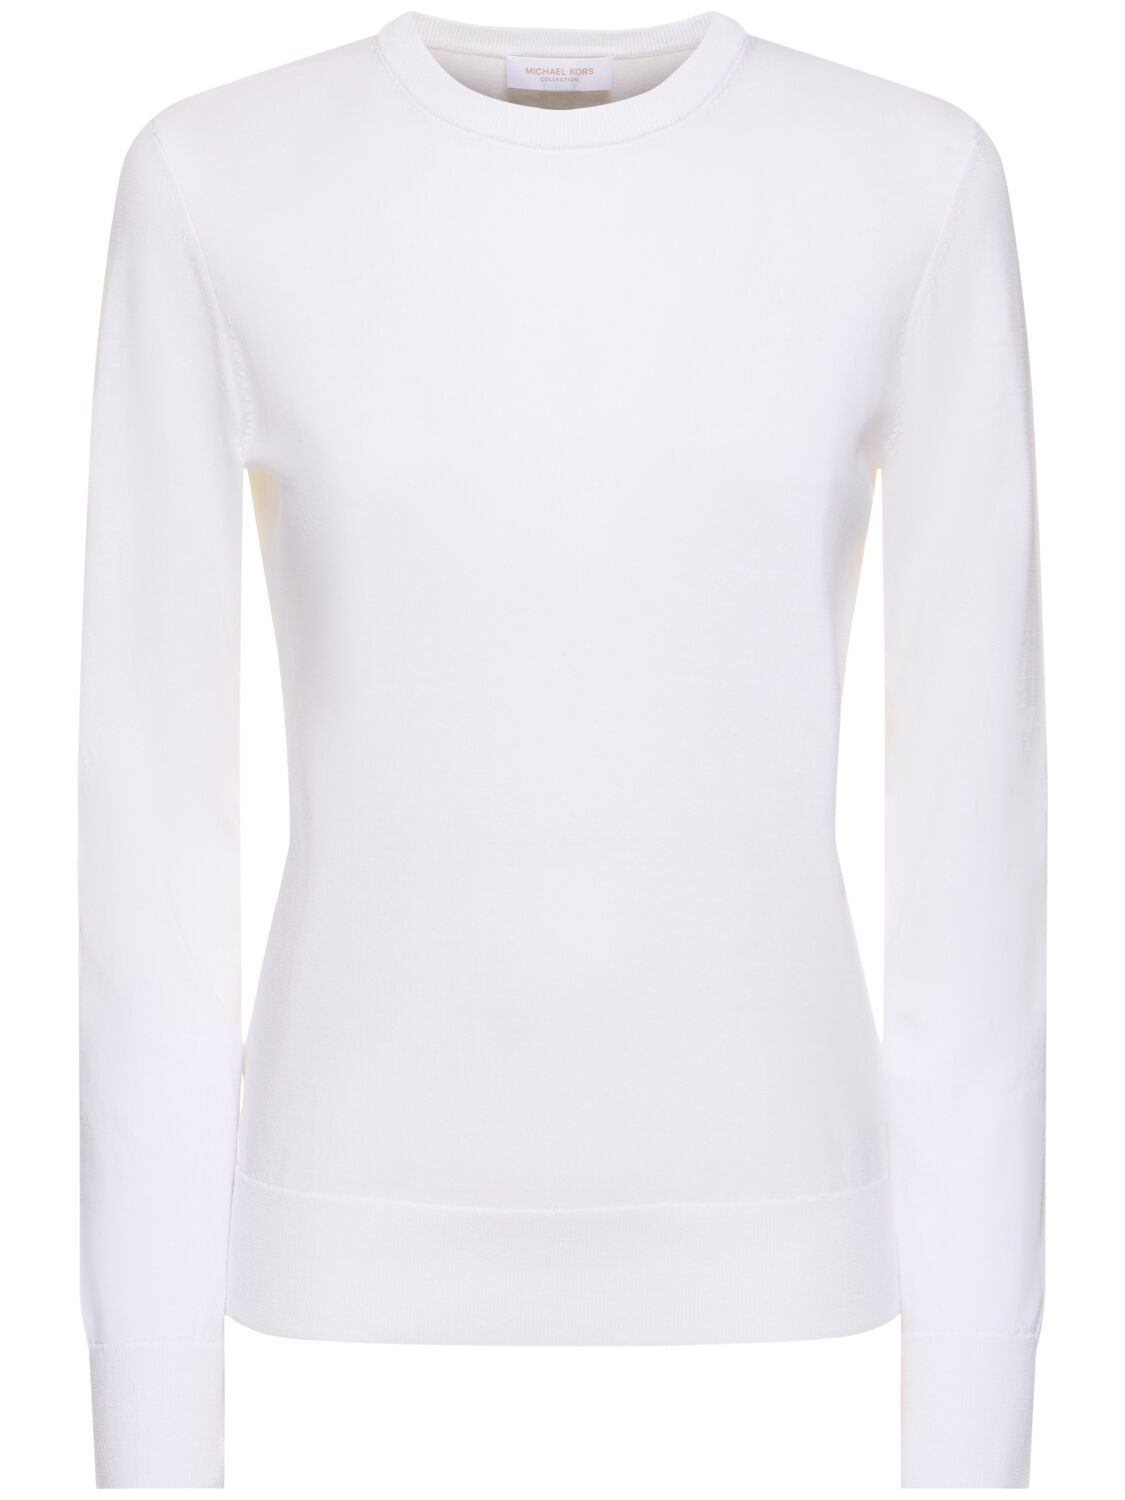 Michael Kors Cotton Knit Crewneck Long Sleeve Top In Optic White